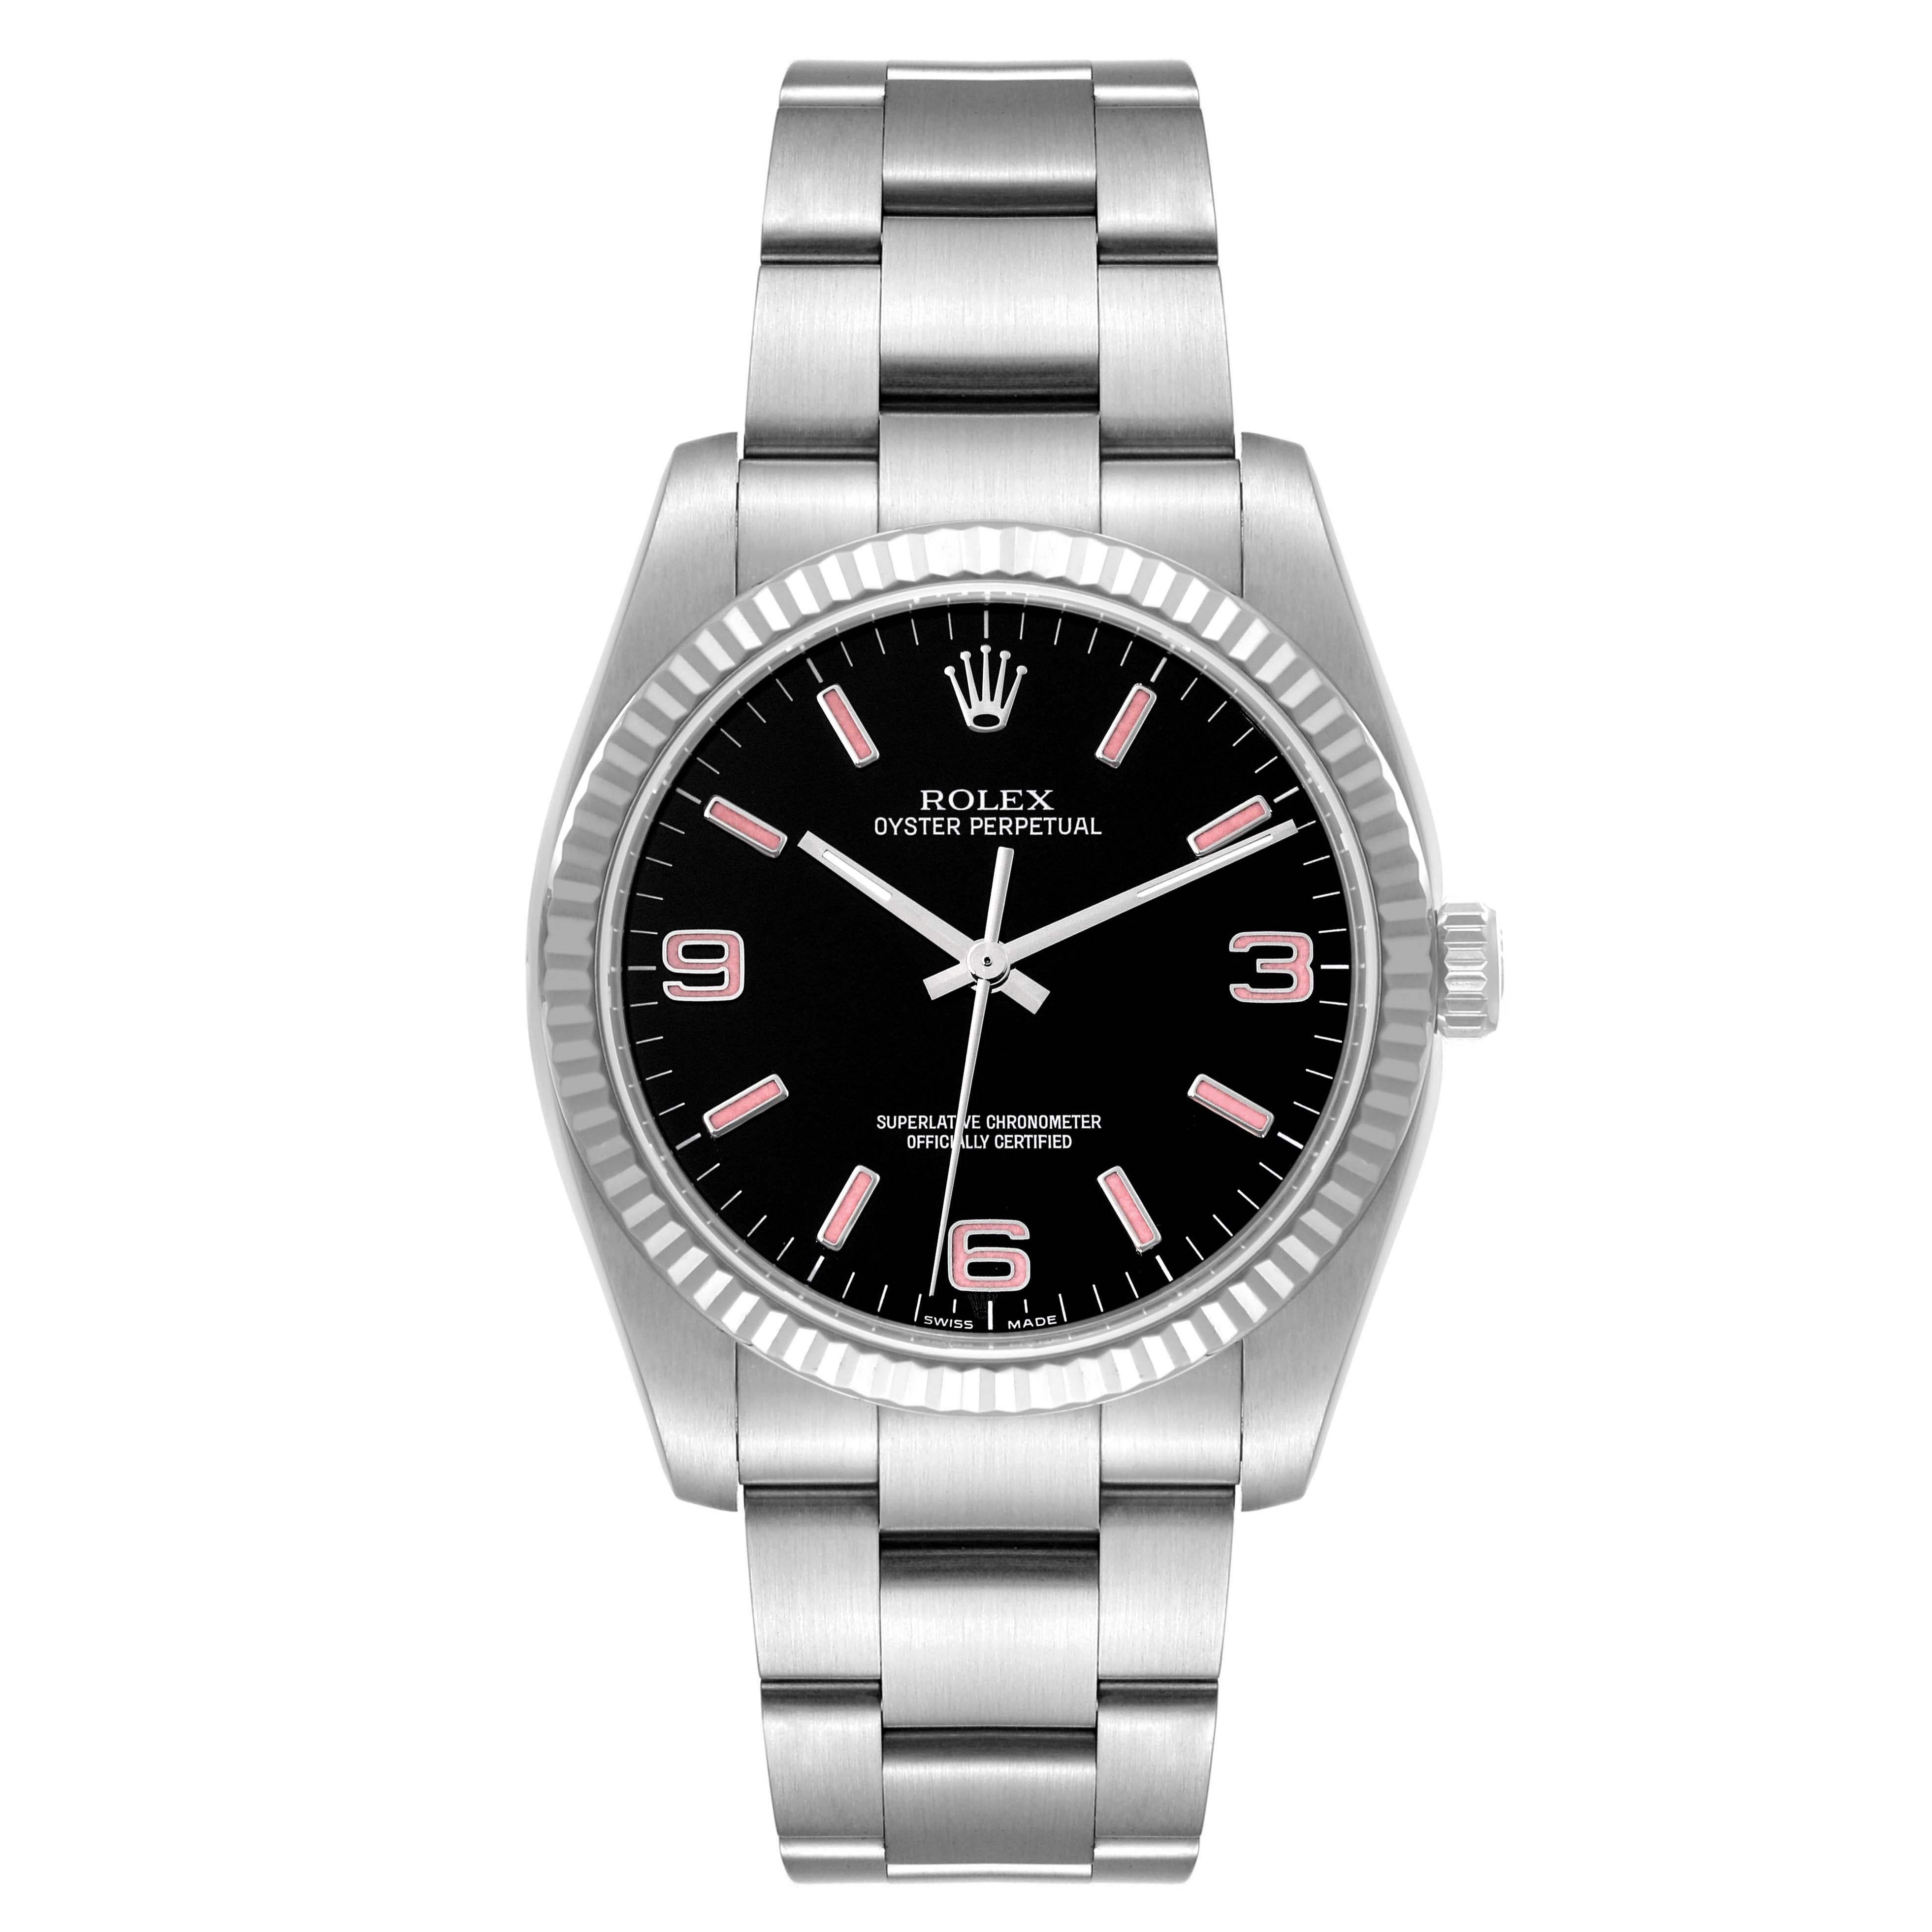 Rolex Oyster Perpetual Steel White Gold Black Dial Mens Watch 116034 Box Card. Officially certified chronometer self-winding movement. Stainless steel case 36.0 mm in diameter. Rolex logo on a crown. 18K white gold fluted bezel. Scratch resistant